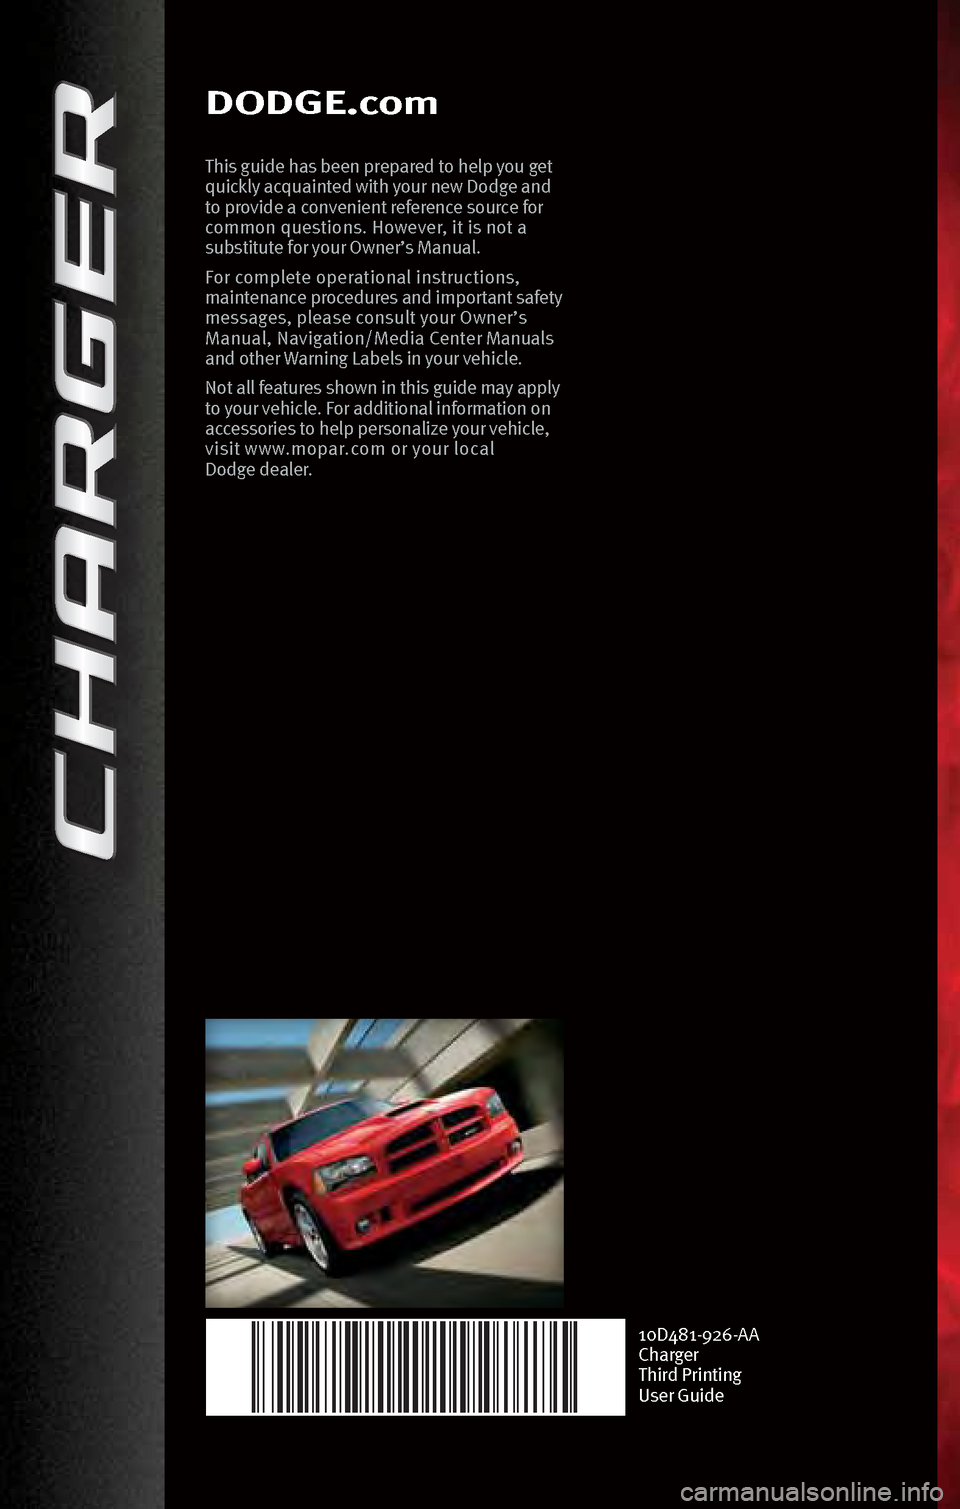 DODGE CHARGER 2010 7.G Manual PDF DODG\f.co\b
This guide h\bs bee\f prep\bred to help you get 
quickly \bcqu\bi\fted with your \few Dodge \b\fd 
to provide \b co\fve\fie\ft refere\fce source for 
commo\f questio\fs. However, it is \fo